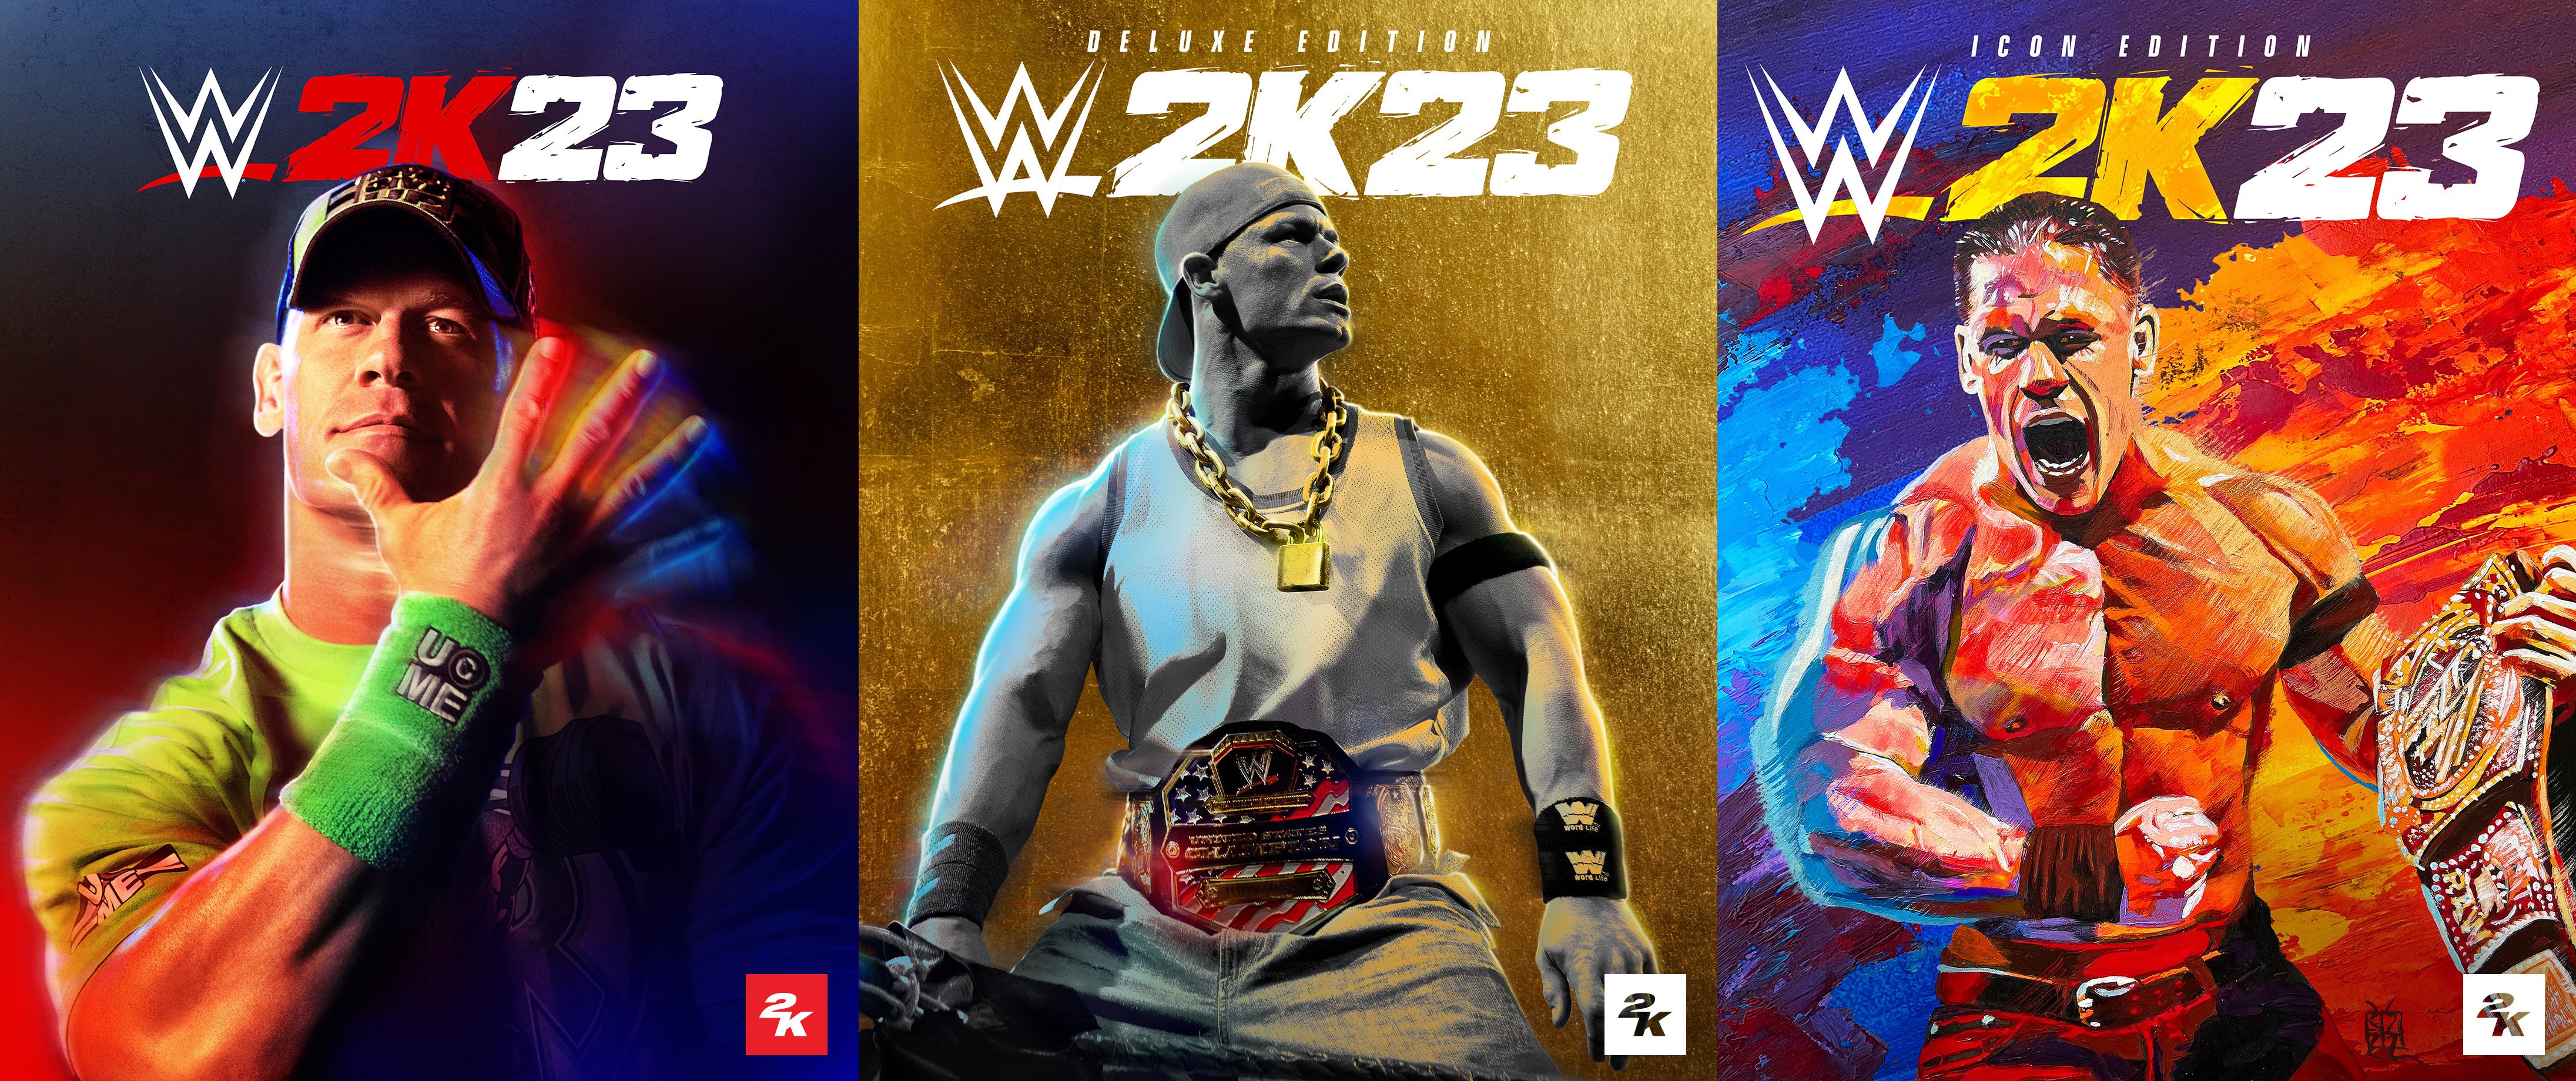  WWE 2K22 Deluxe Edition - PlayStation 4 : Take 2 Interactive